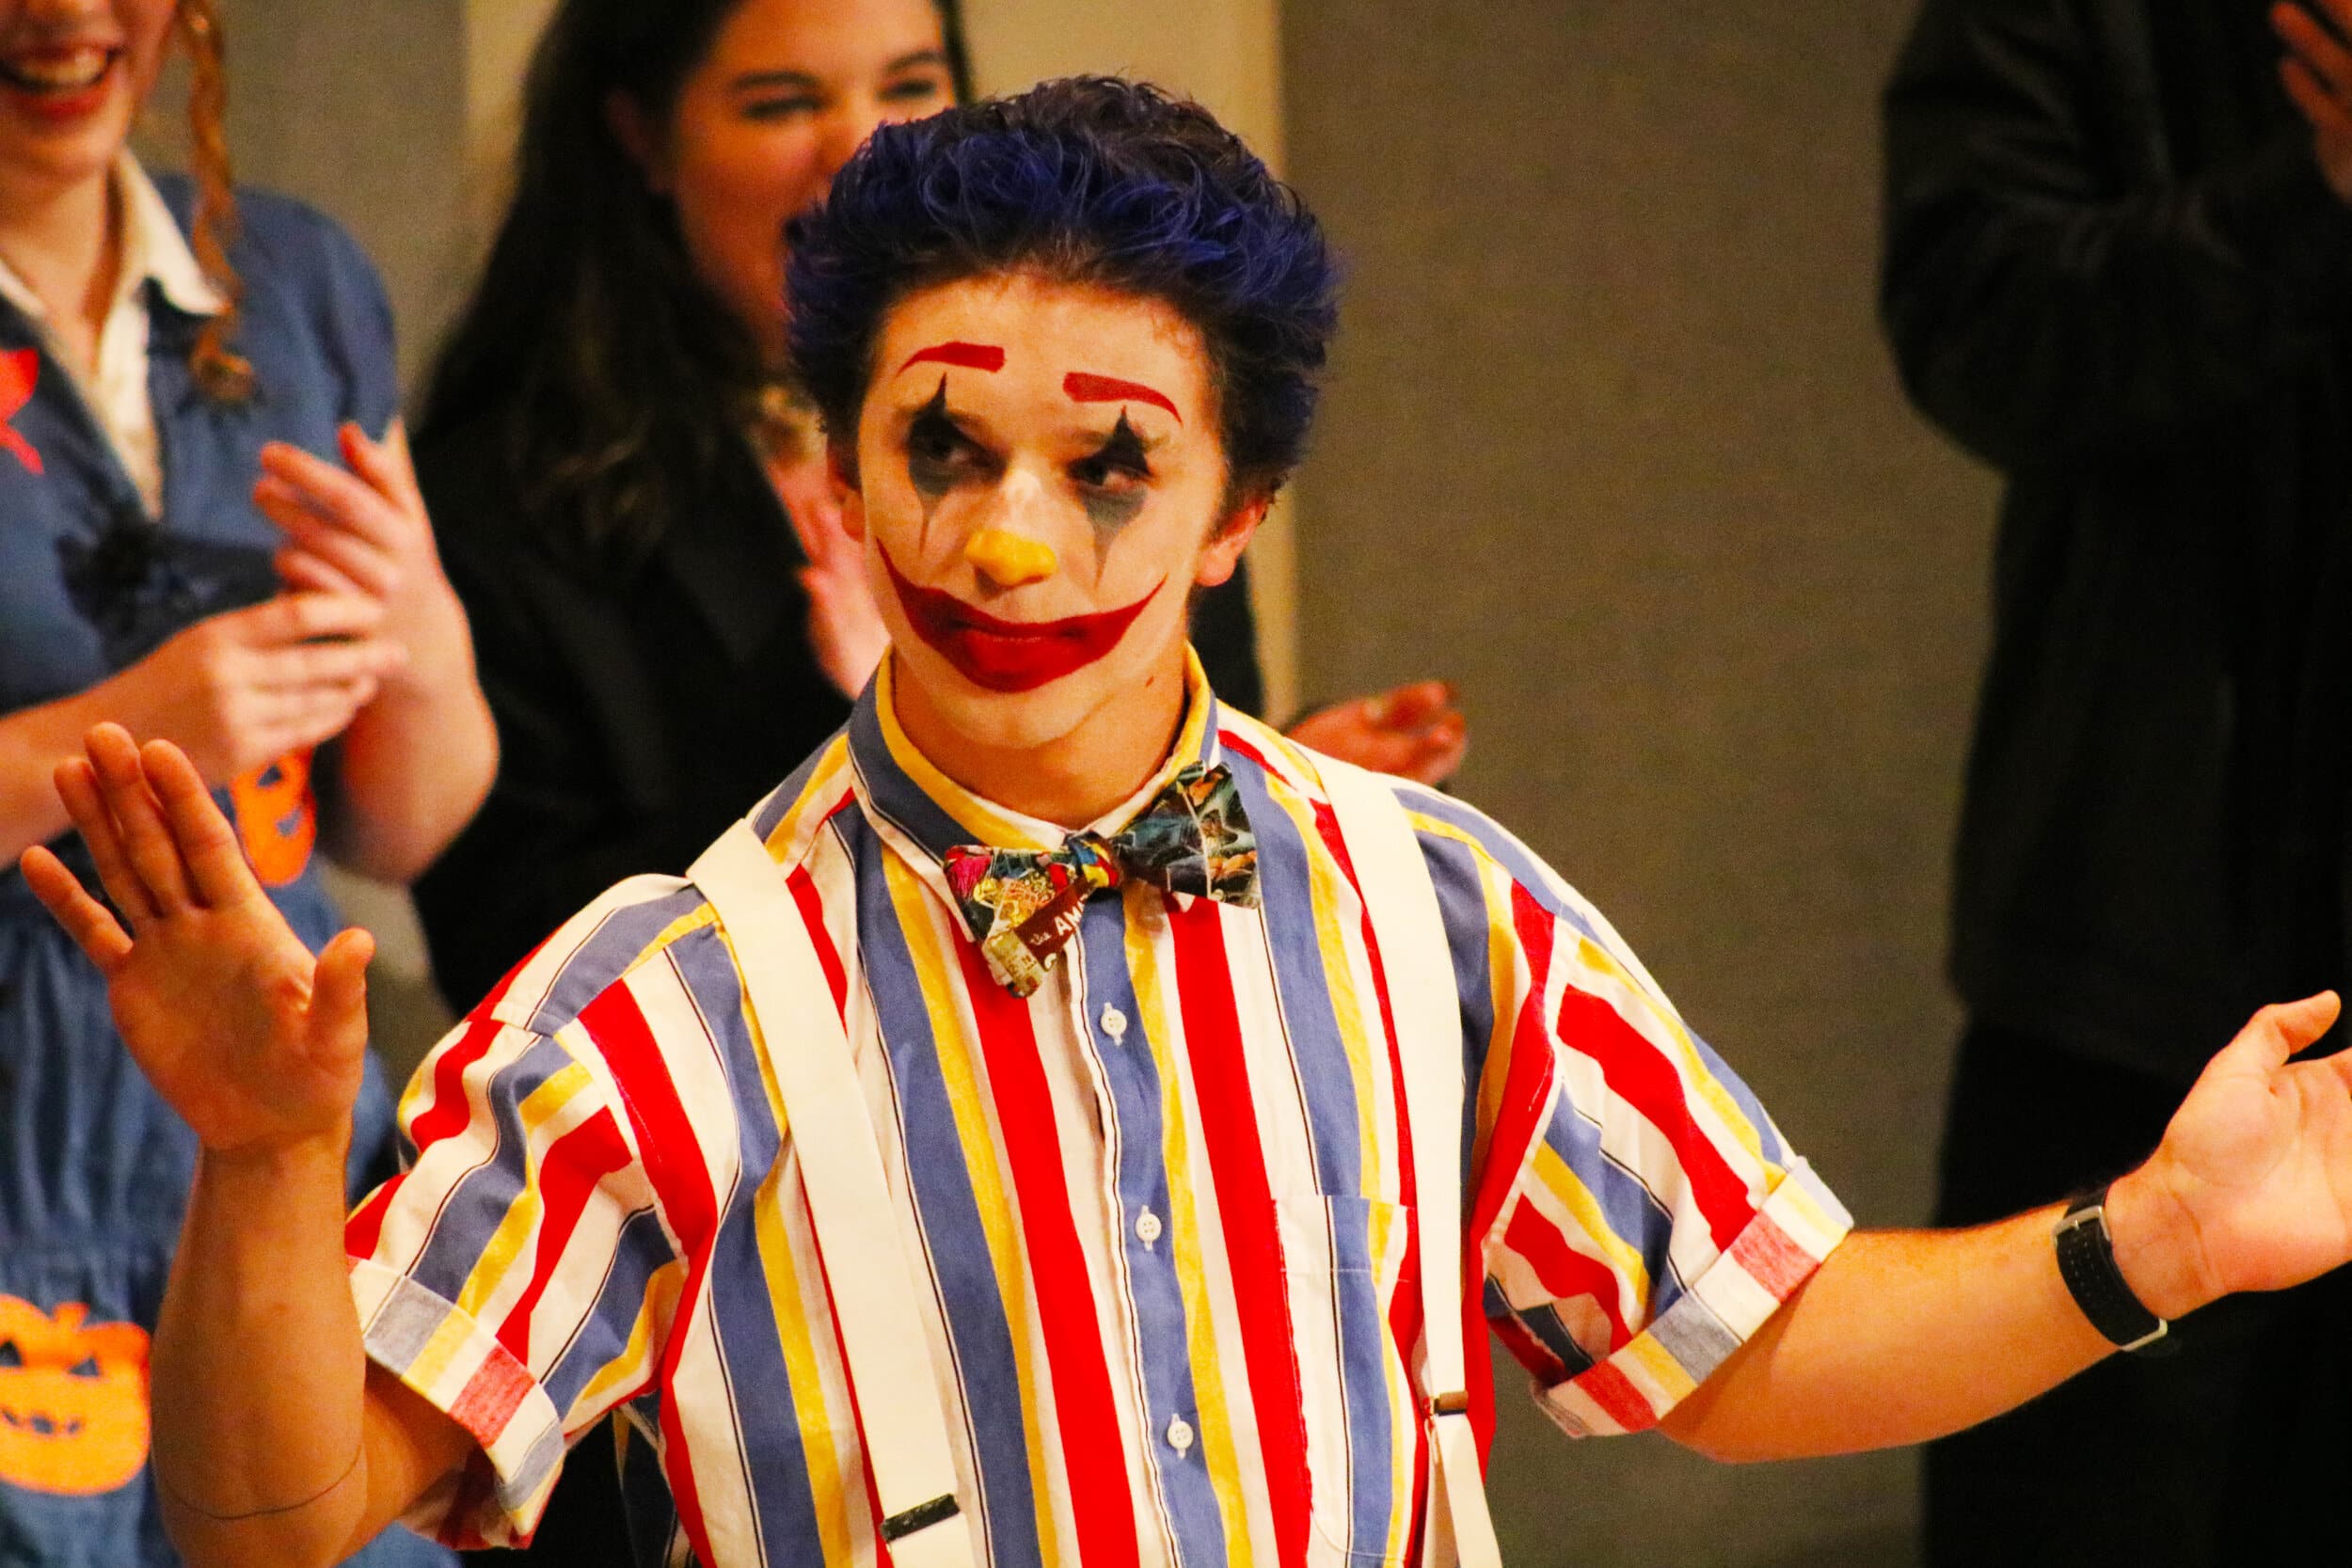 Junior Seth King gets to act in his first improv show on Halloween night dressed up as a clown.